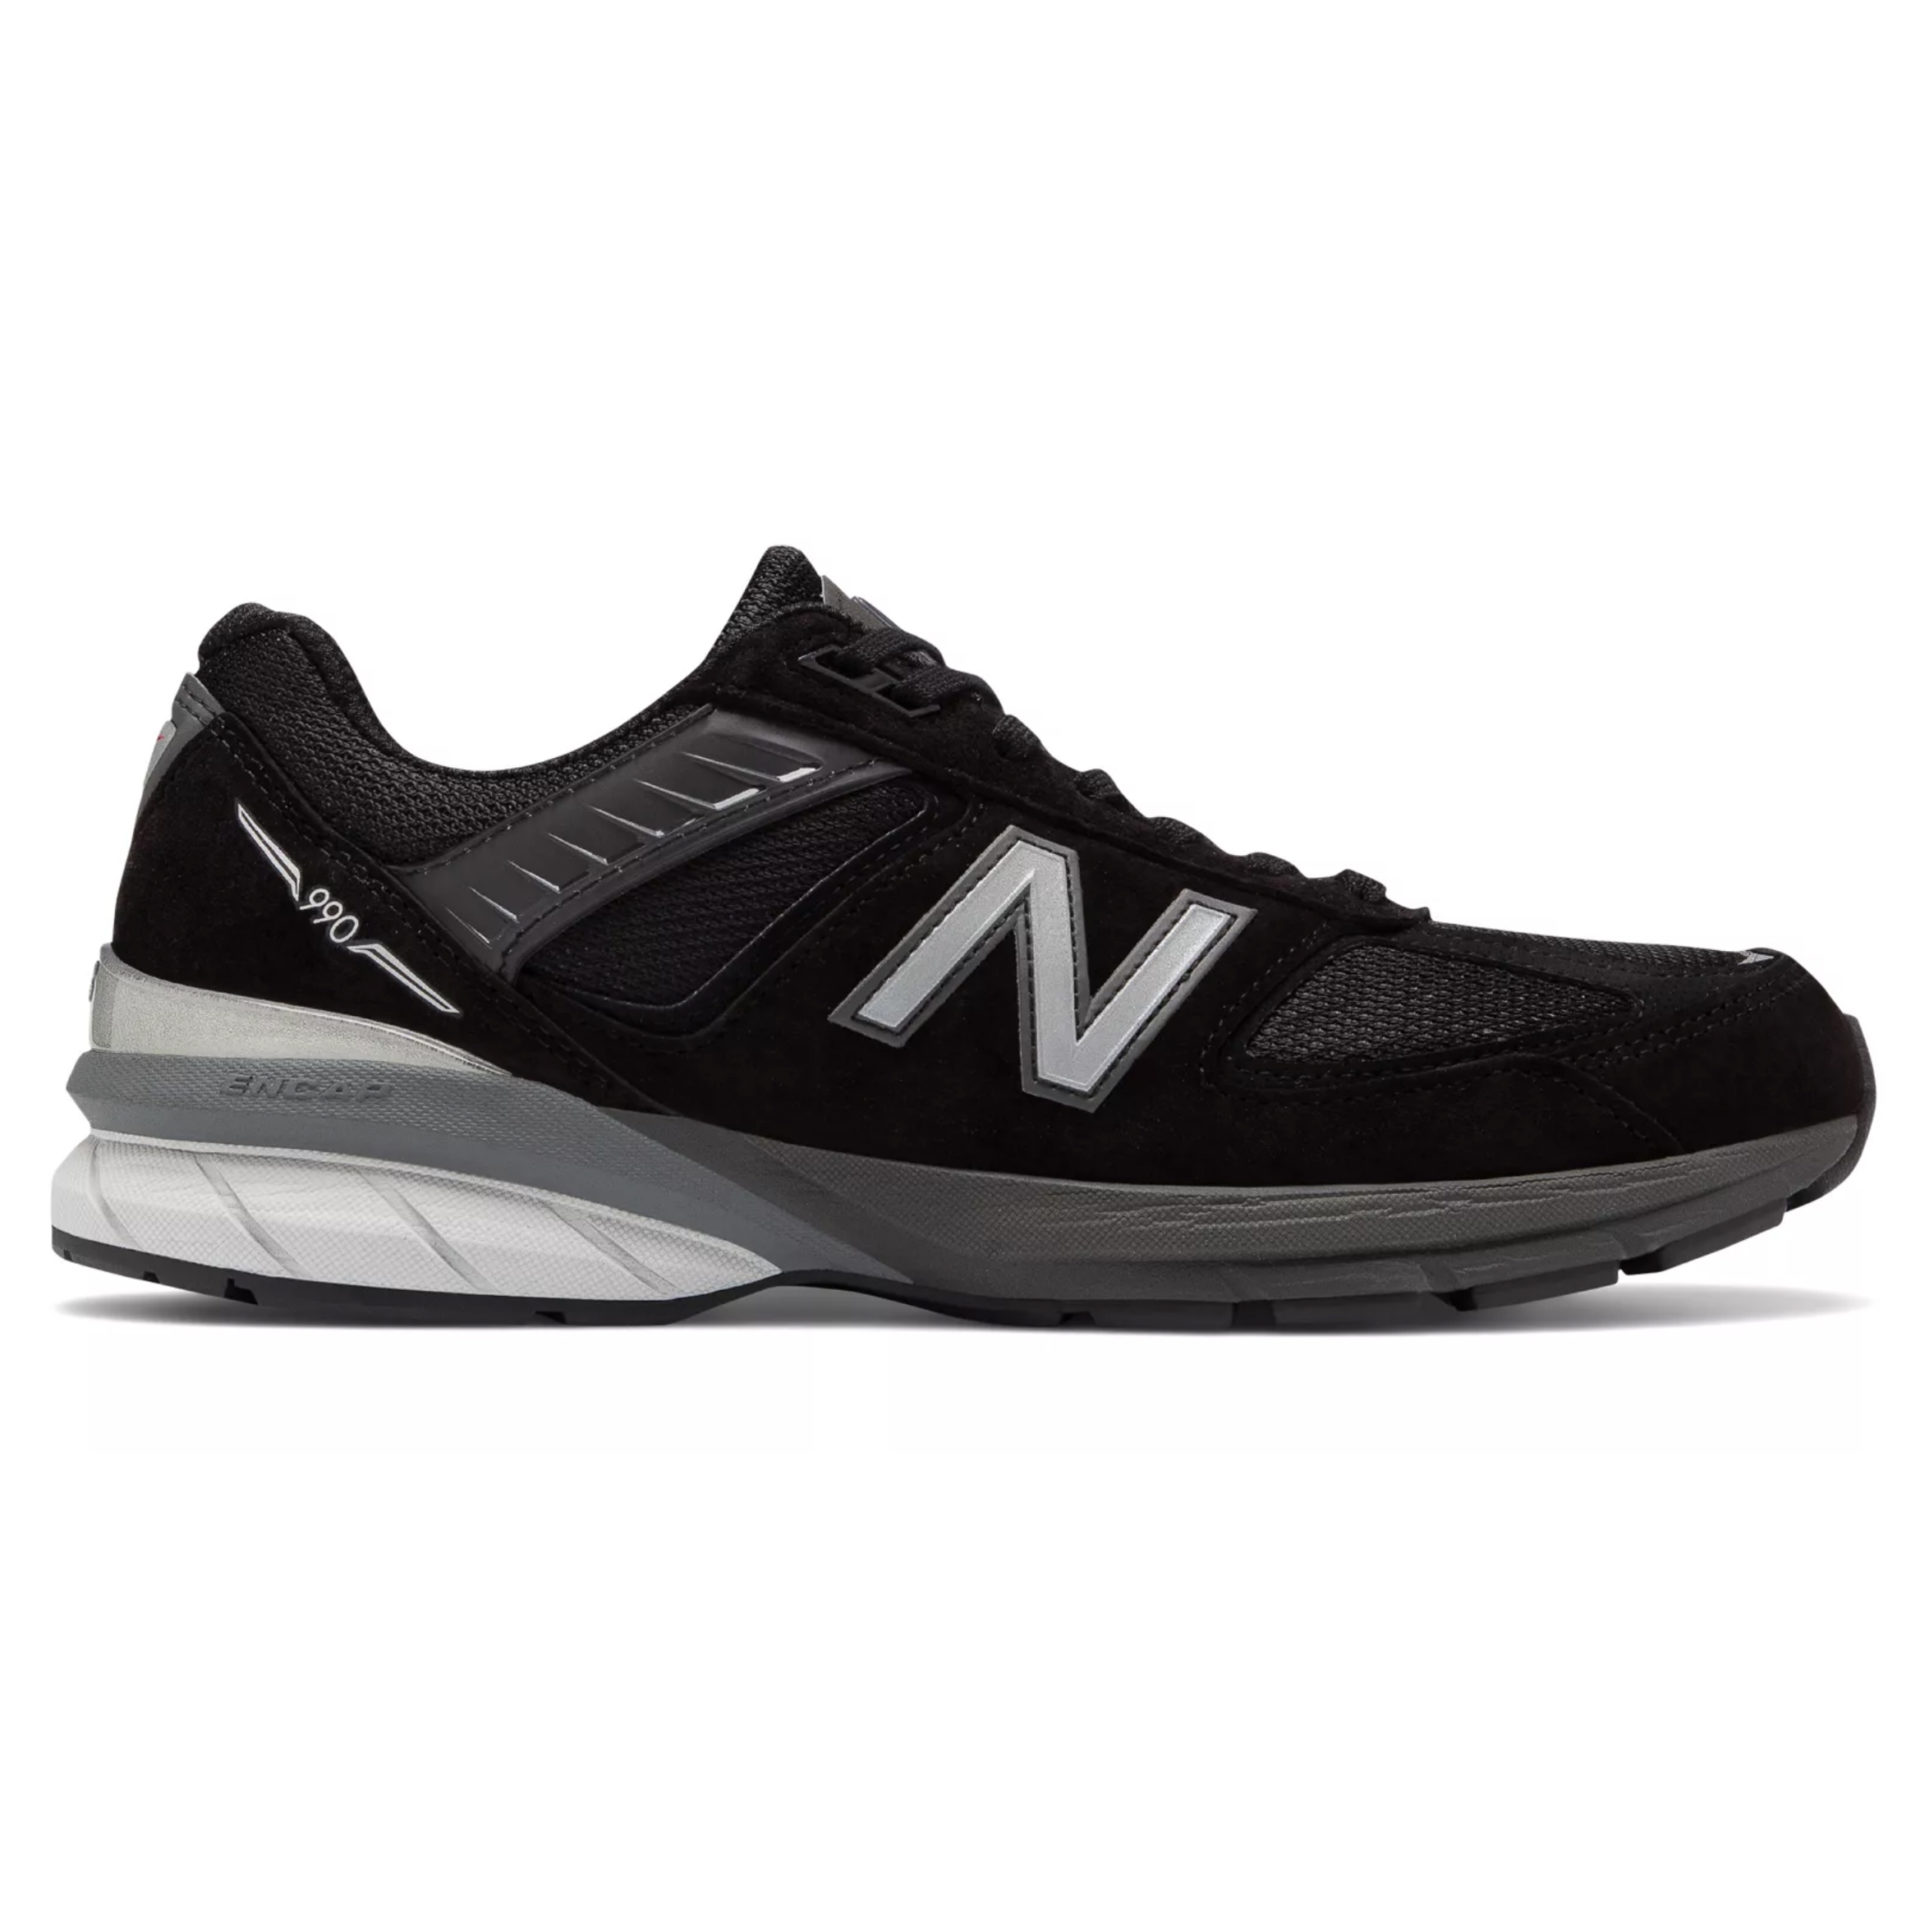 Observatory handling semaphore New Balance Men's 990 v5 Black with Silver | Laurie's Shoes